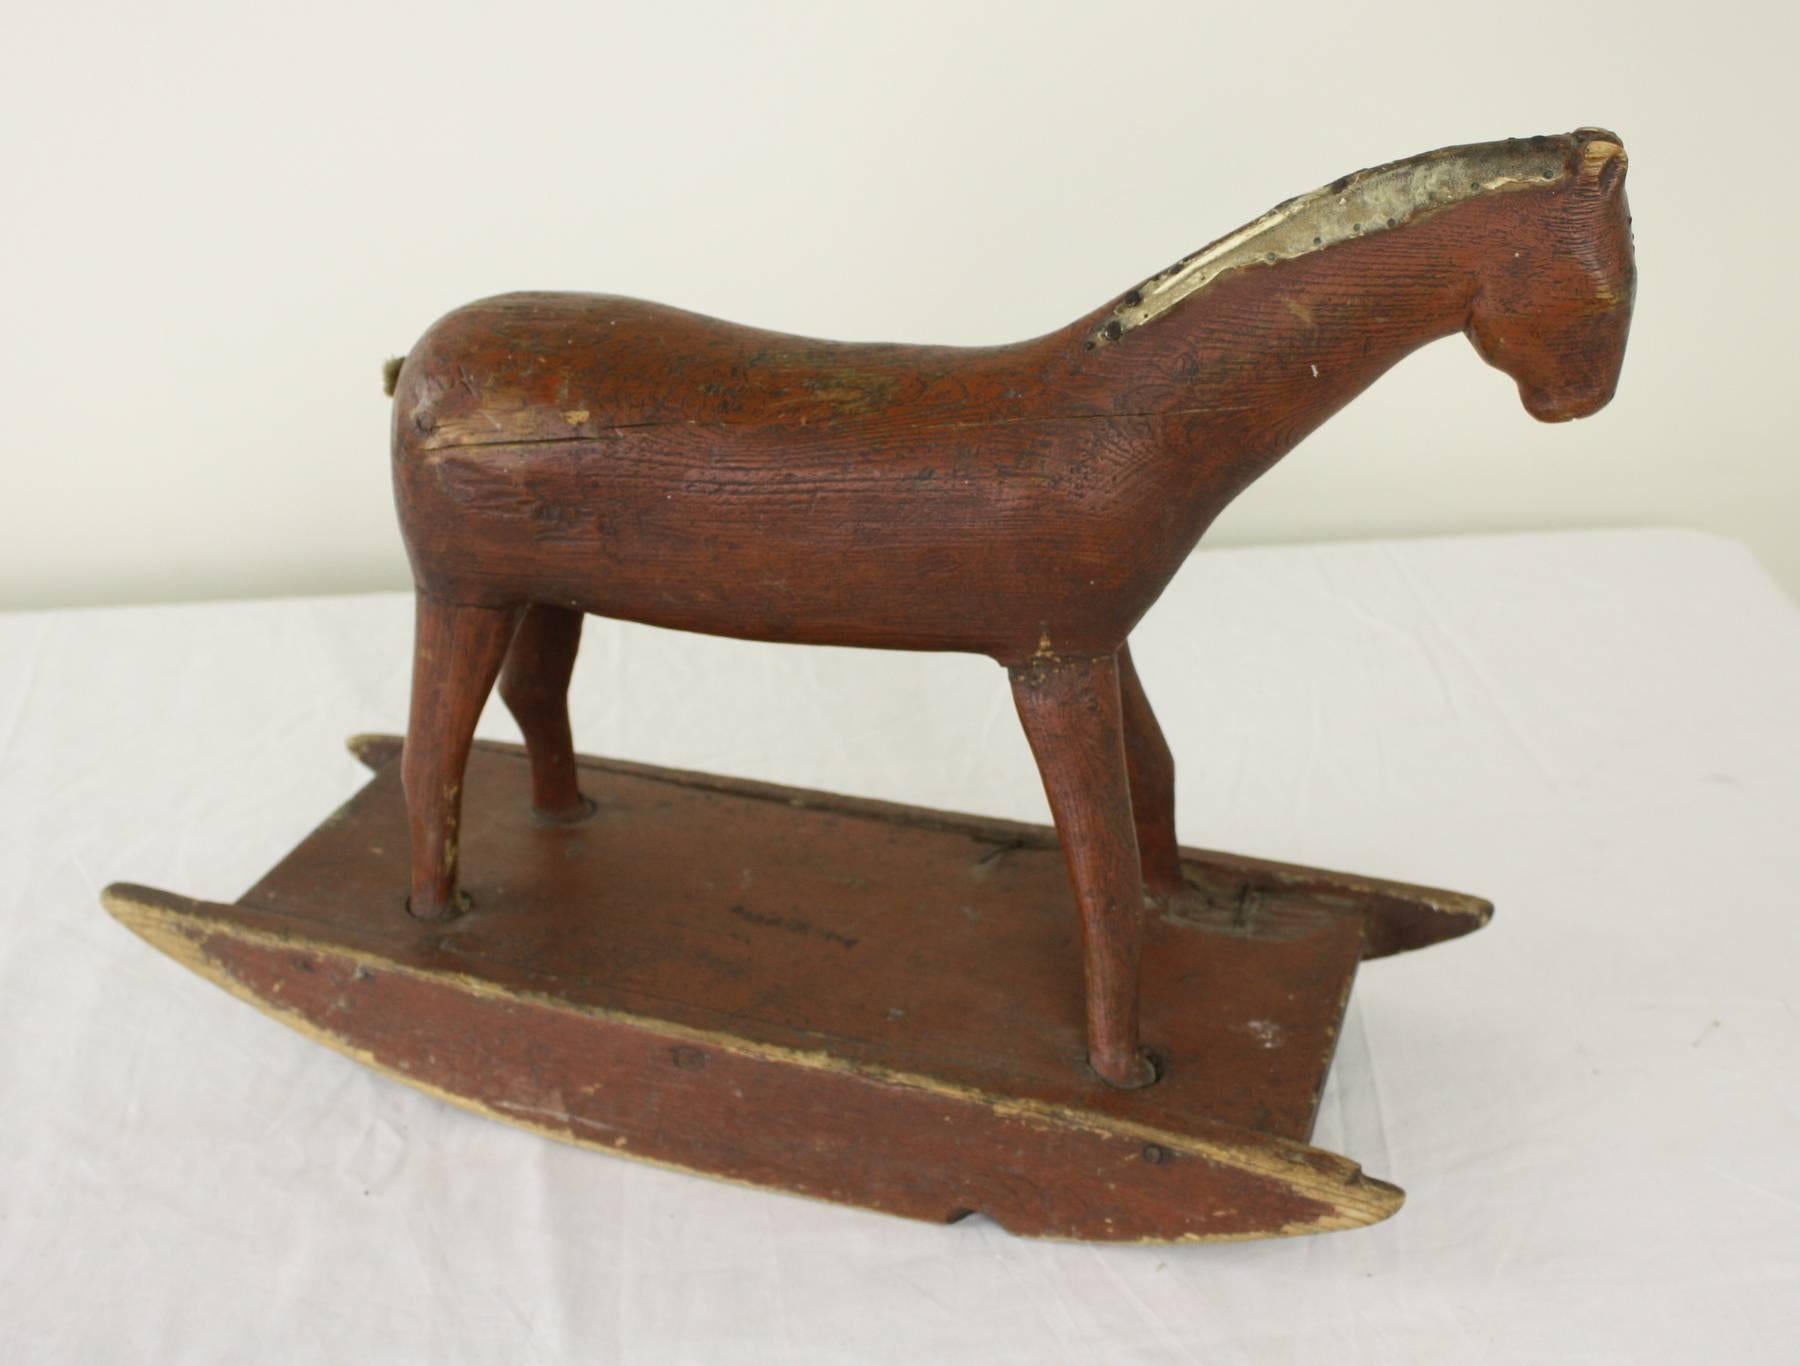 Here is a very Primitive handmade rustic-looking toy rocking horse, from Sweden, in a nice big size, 21